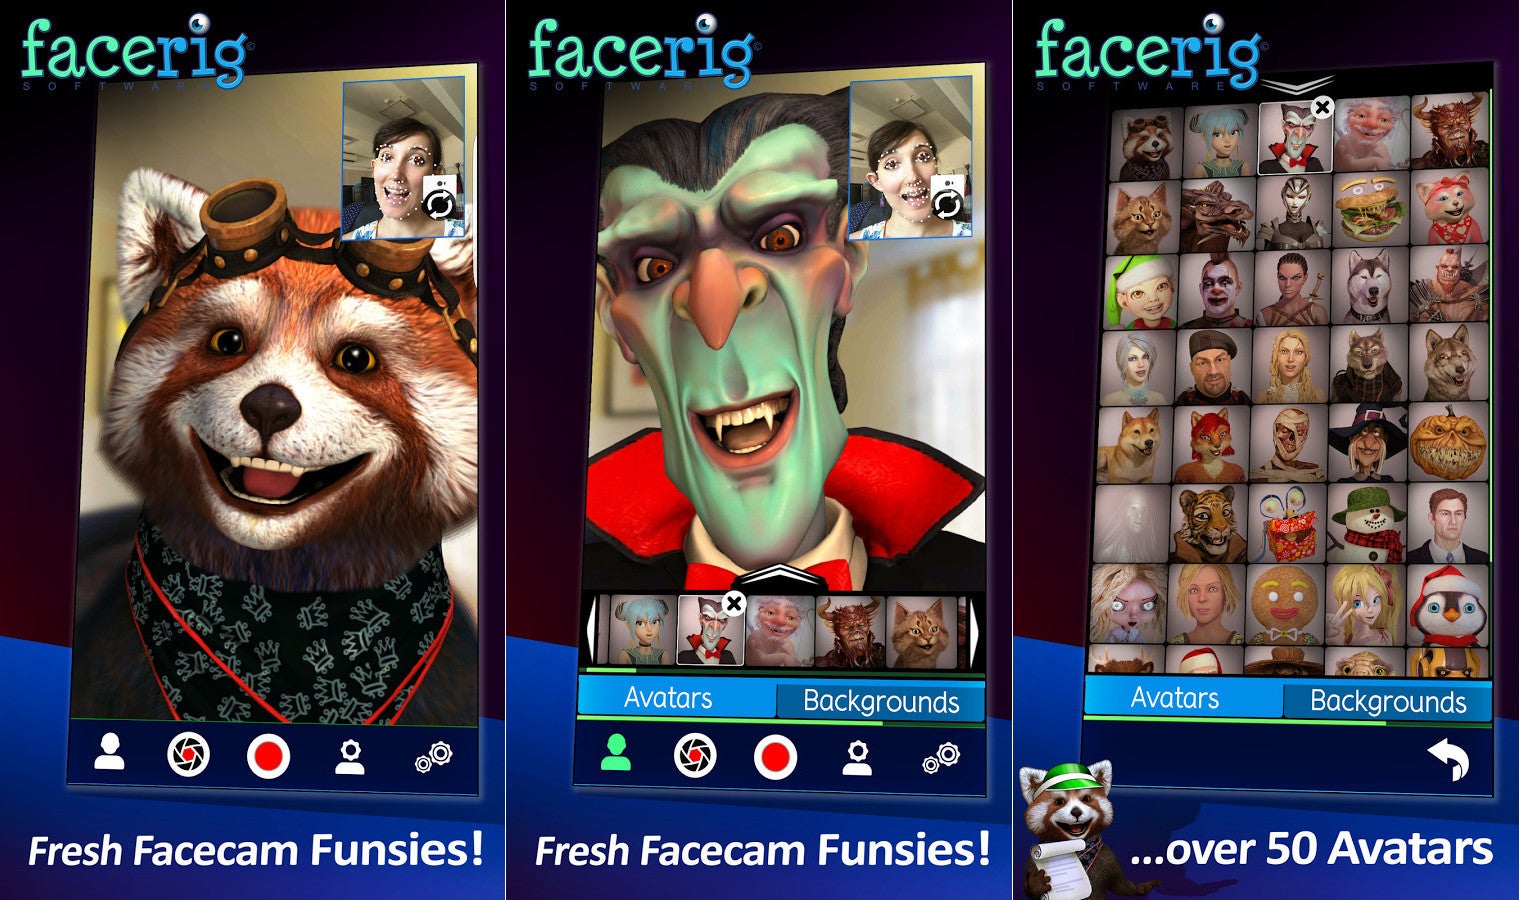 Spotlight: I've 'rigged' my face using this funny mobile app called FaceRig